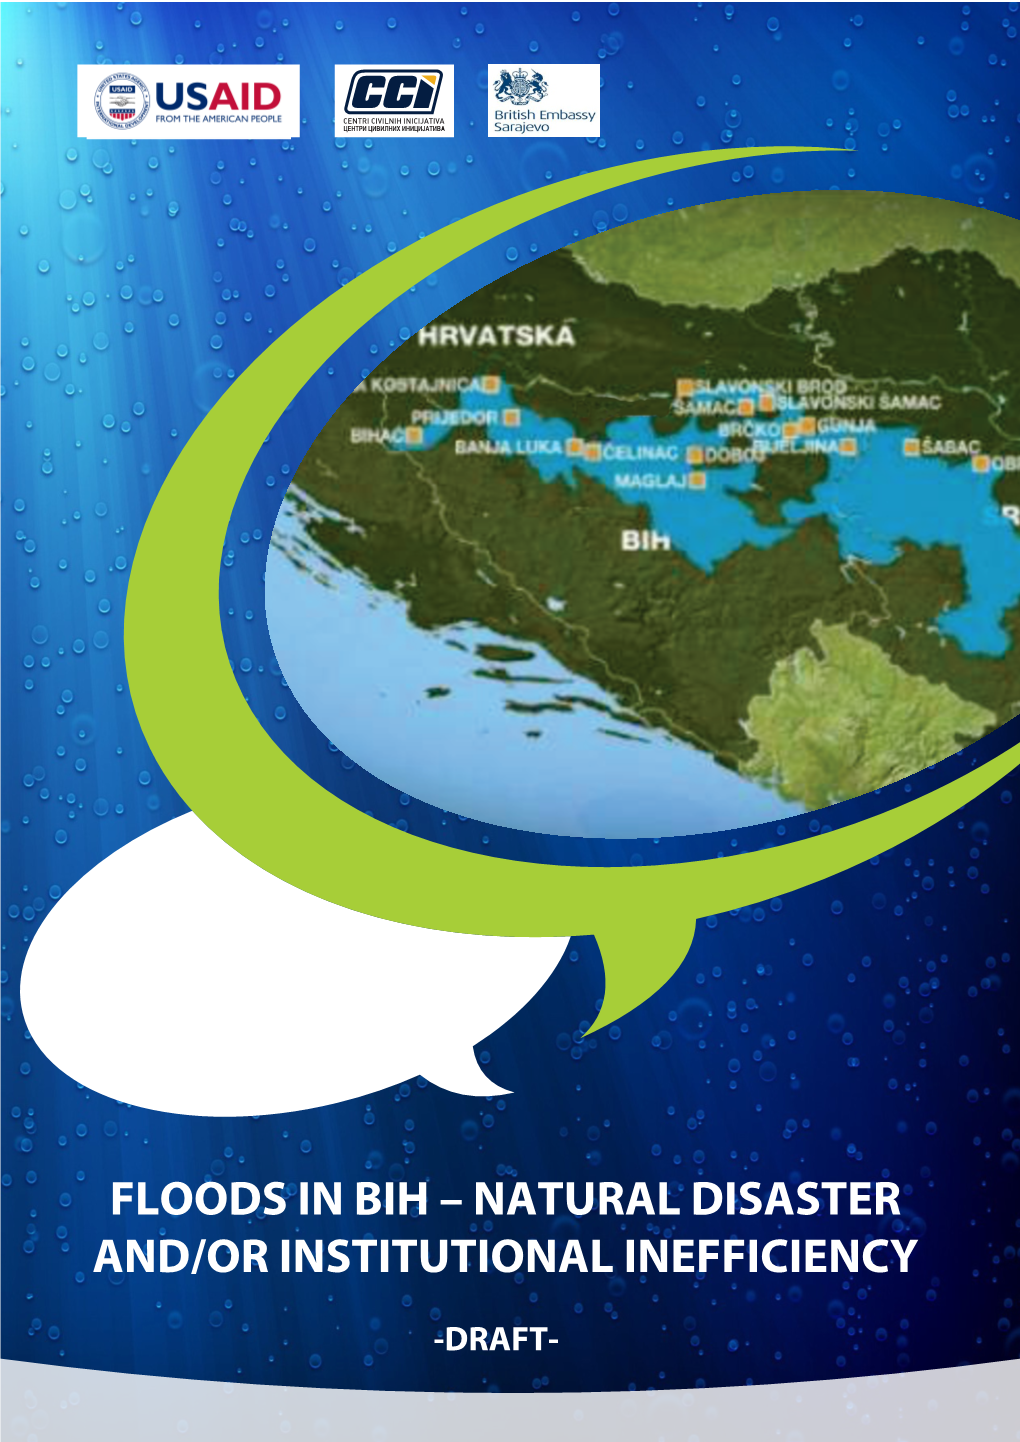 Floods in Bih – Natural Disaster And/Or Institutional Inefficiency